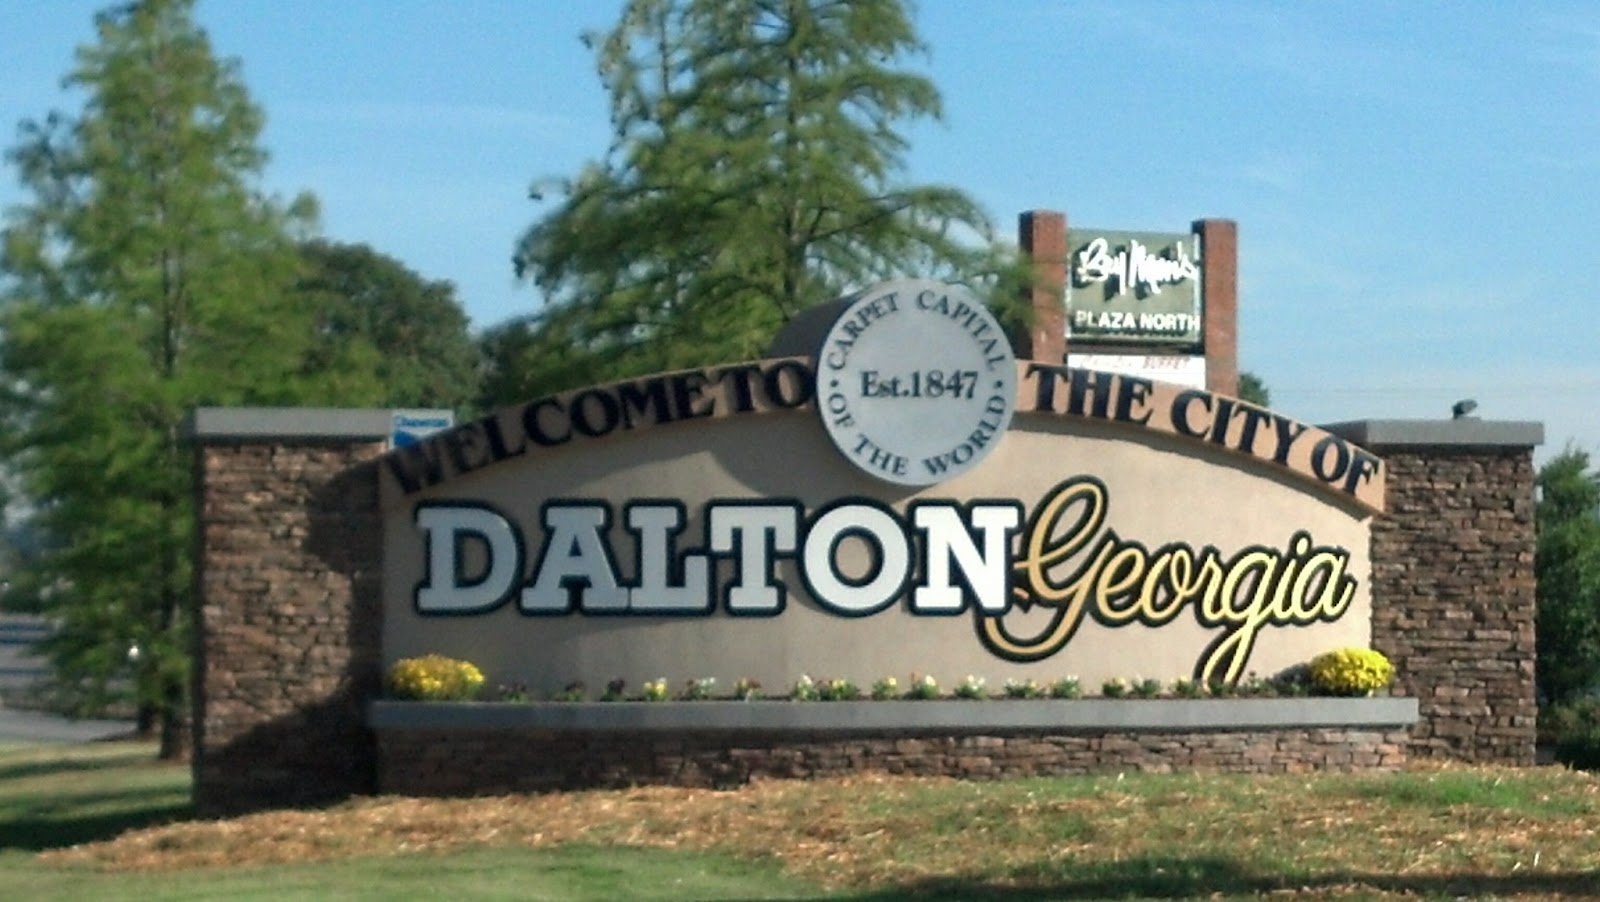 Stop in Dalton Georgia sign on your drive to Atlanta from Nashville